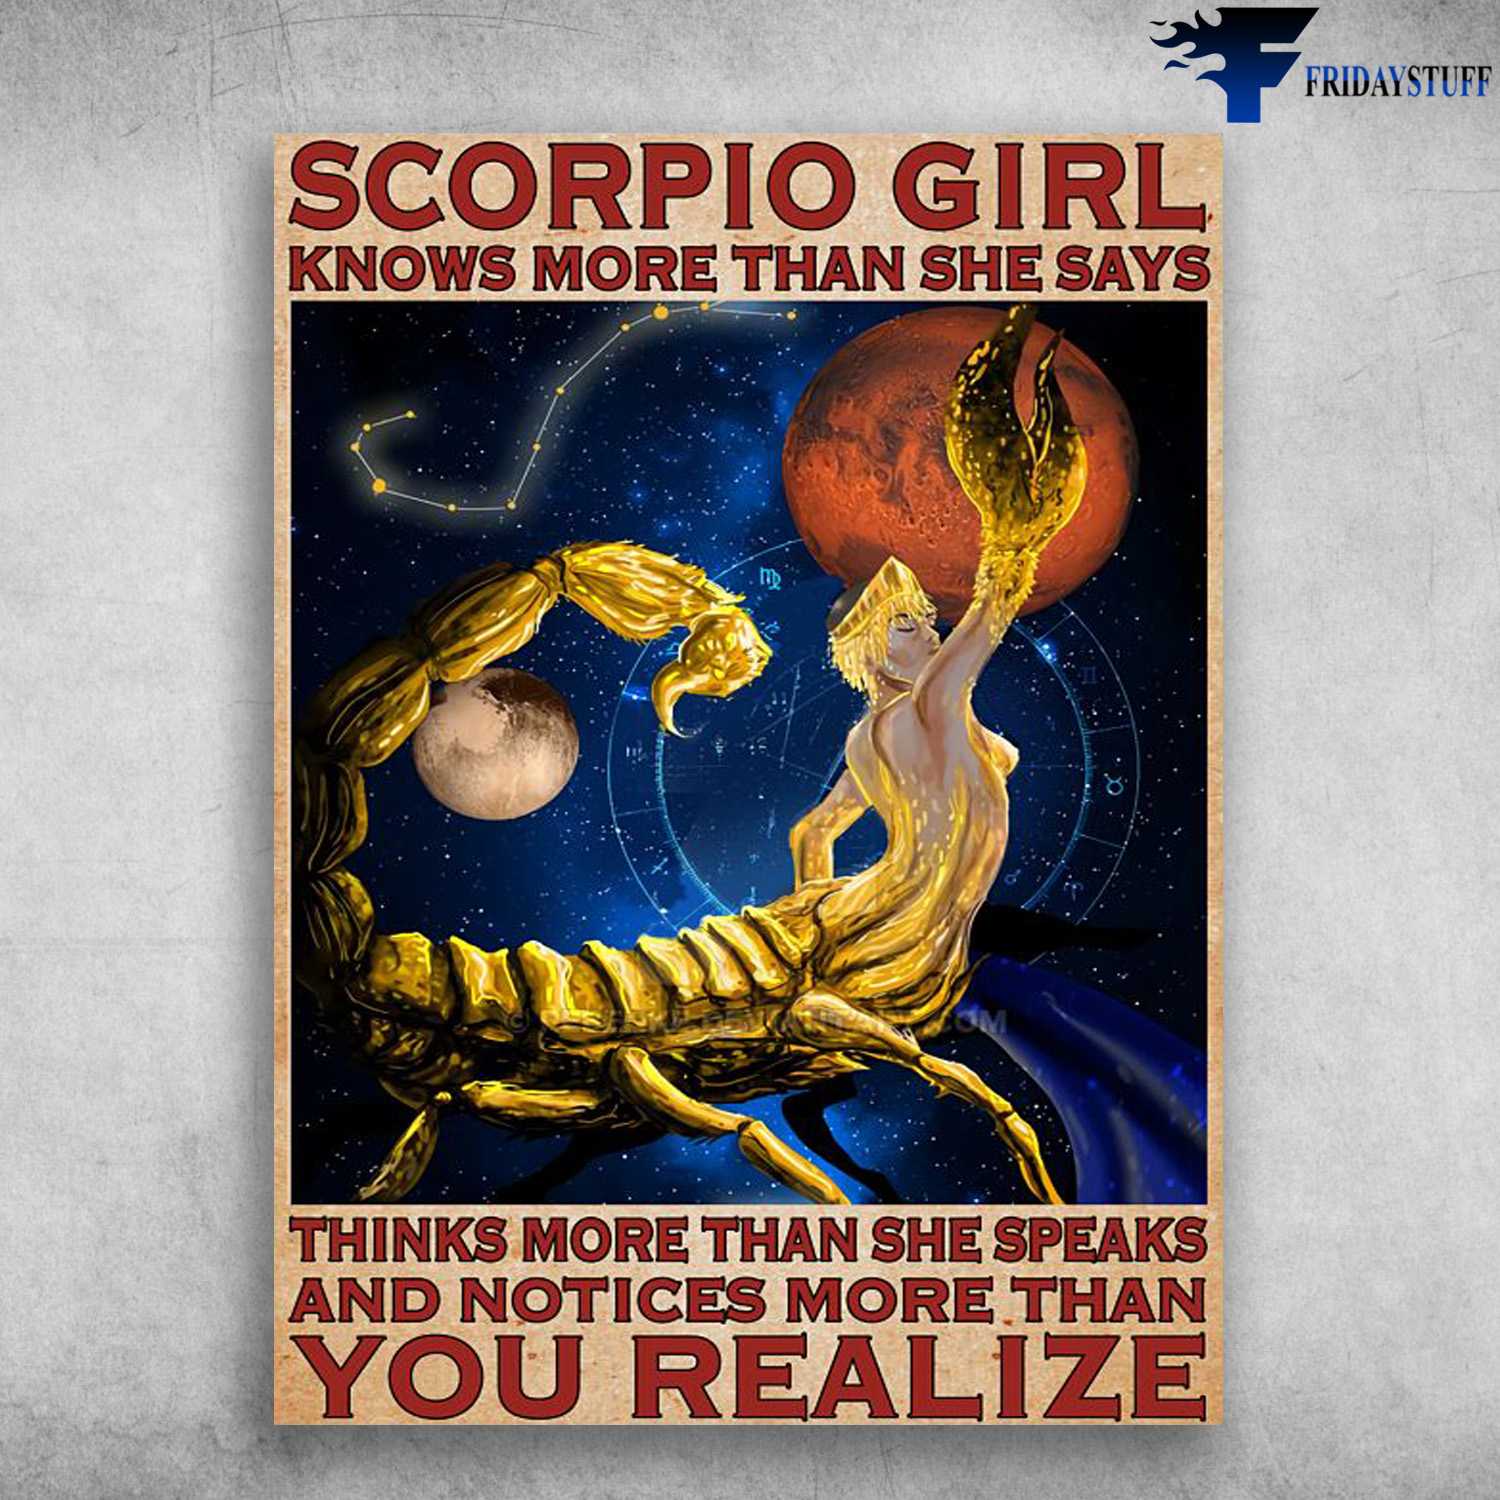 Scorpio Girl, Birthday Poster, Knows More Than She Says, Thinks More Than She Speak, And Notices More Than You Realize